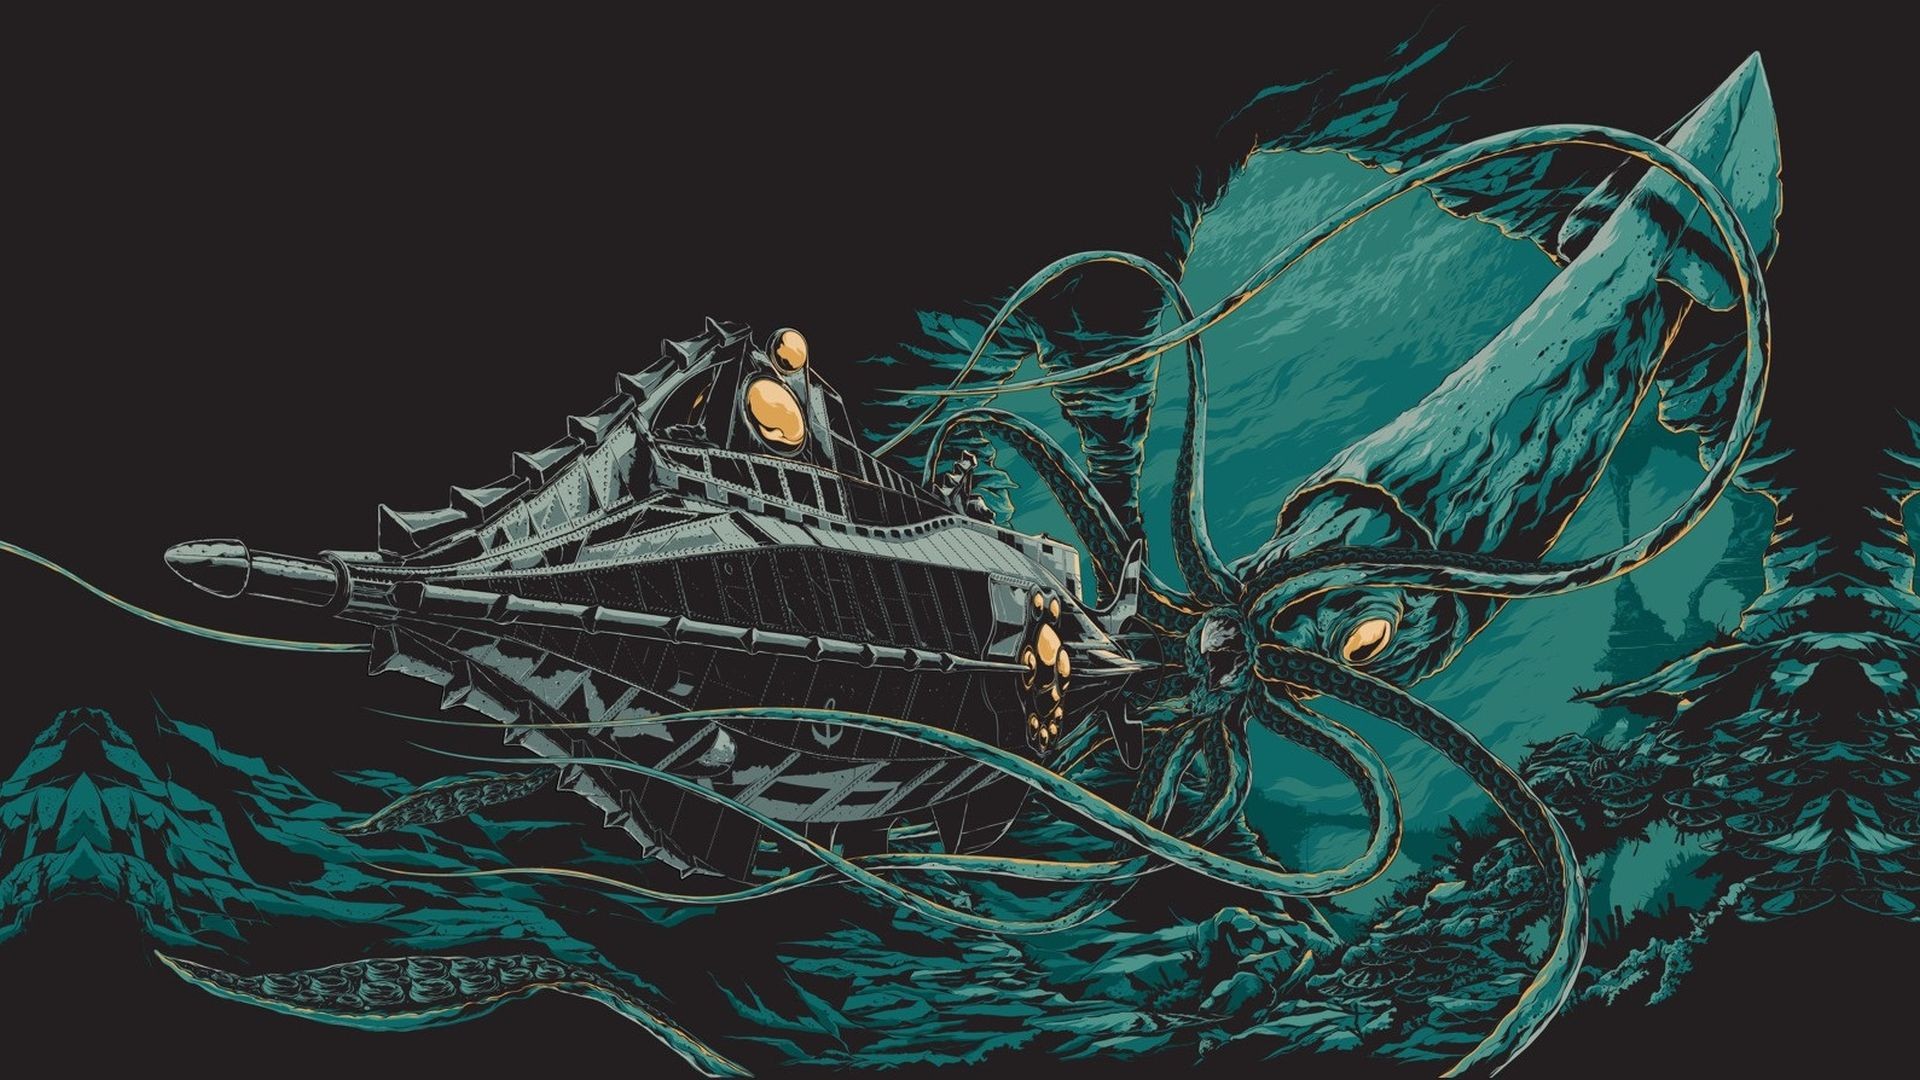 20,000 Leagues Under the Sea by Jules Verne